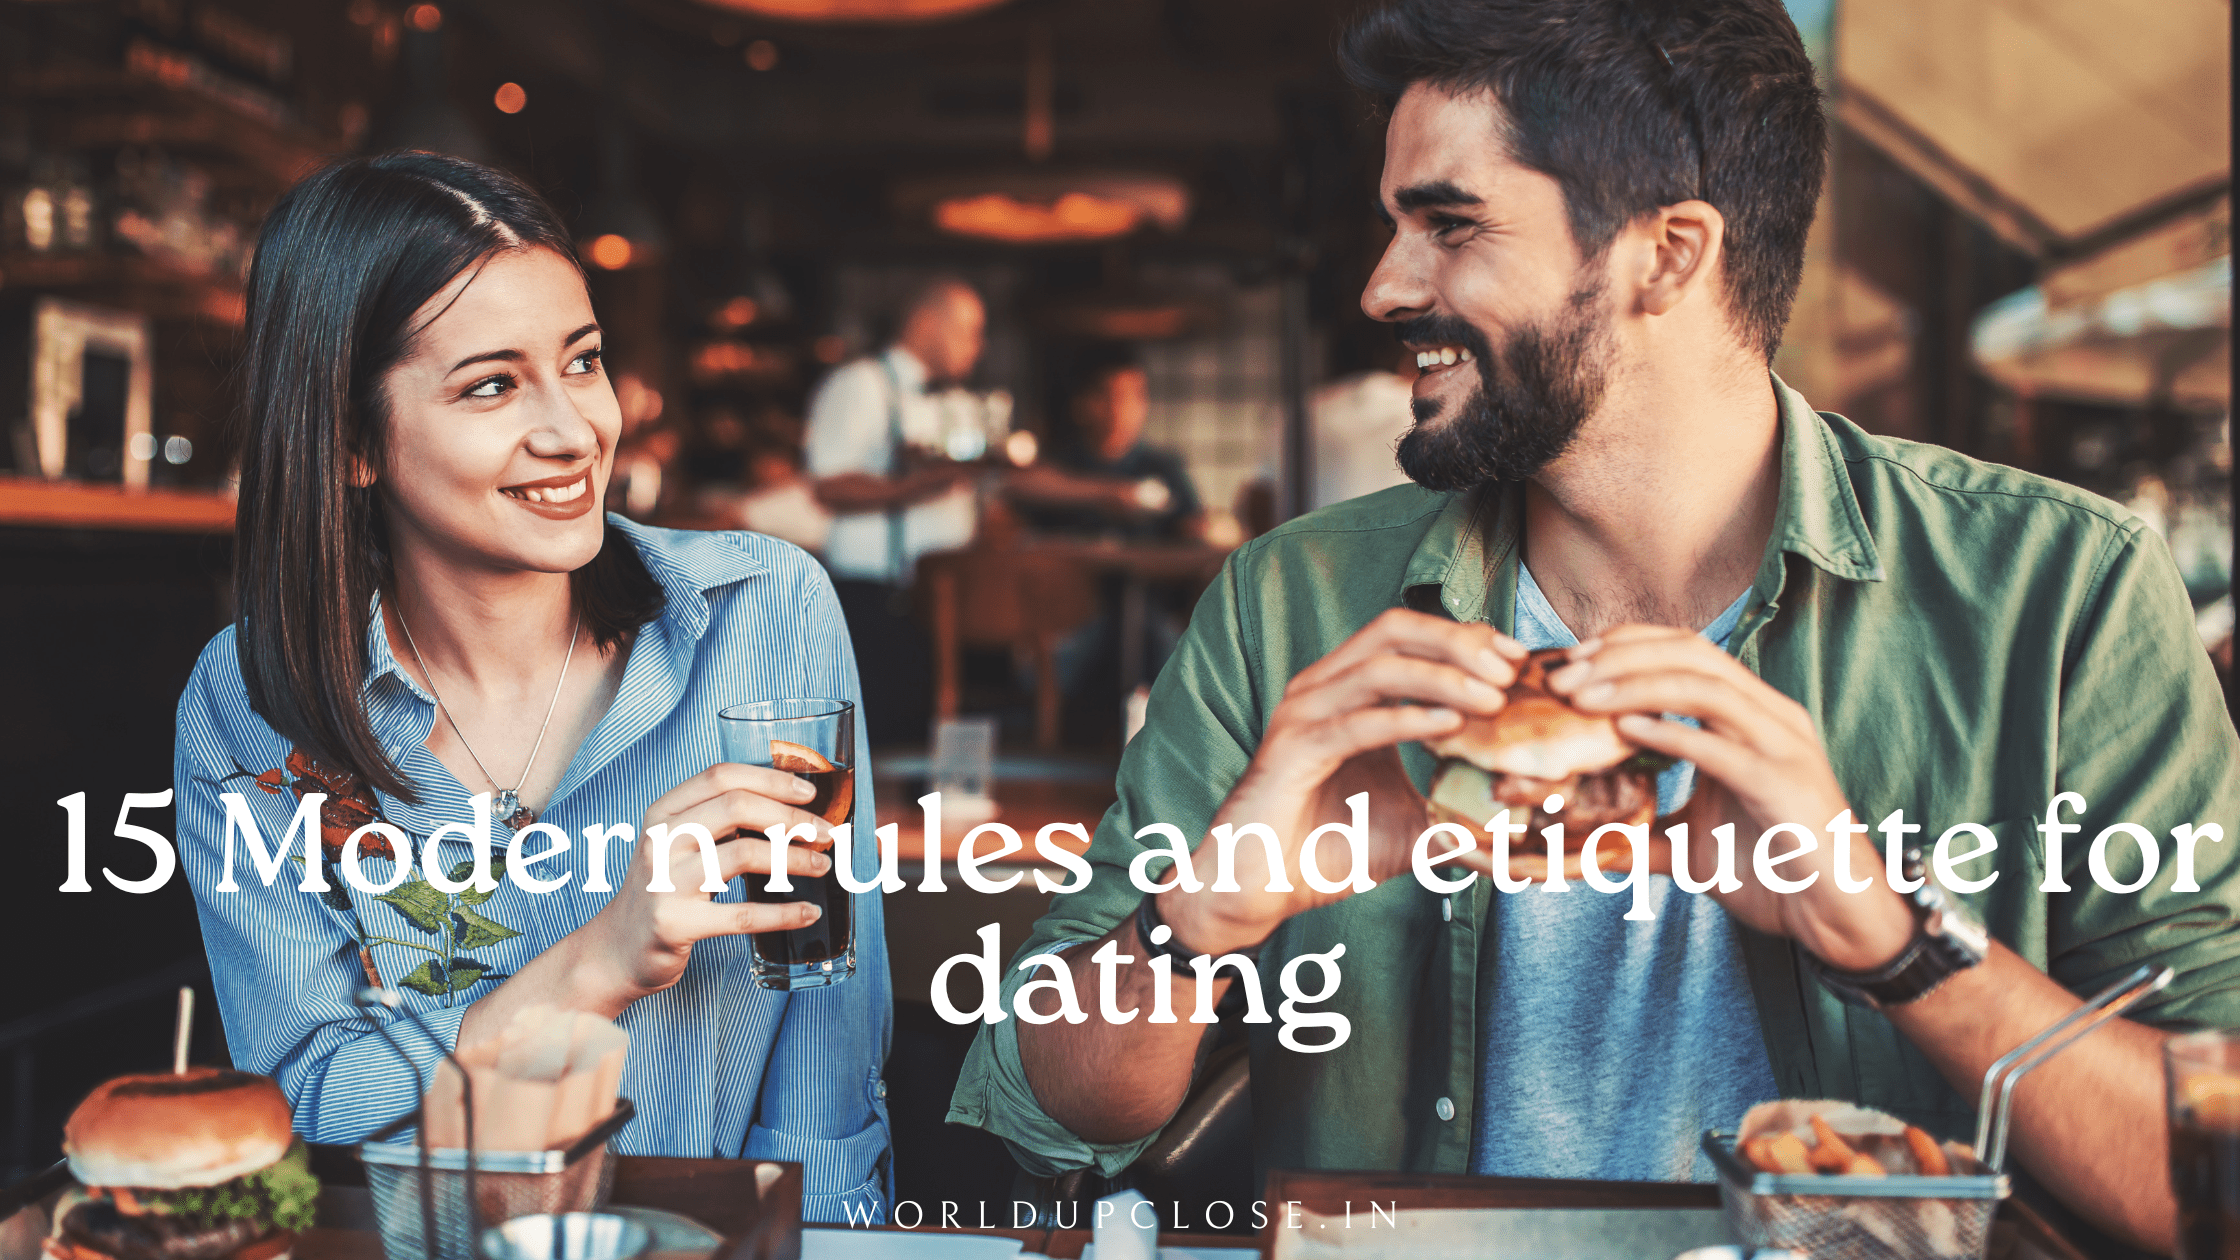 15 Modern rules and etiquette for dating 35